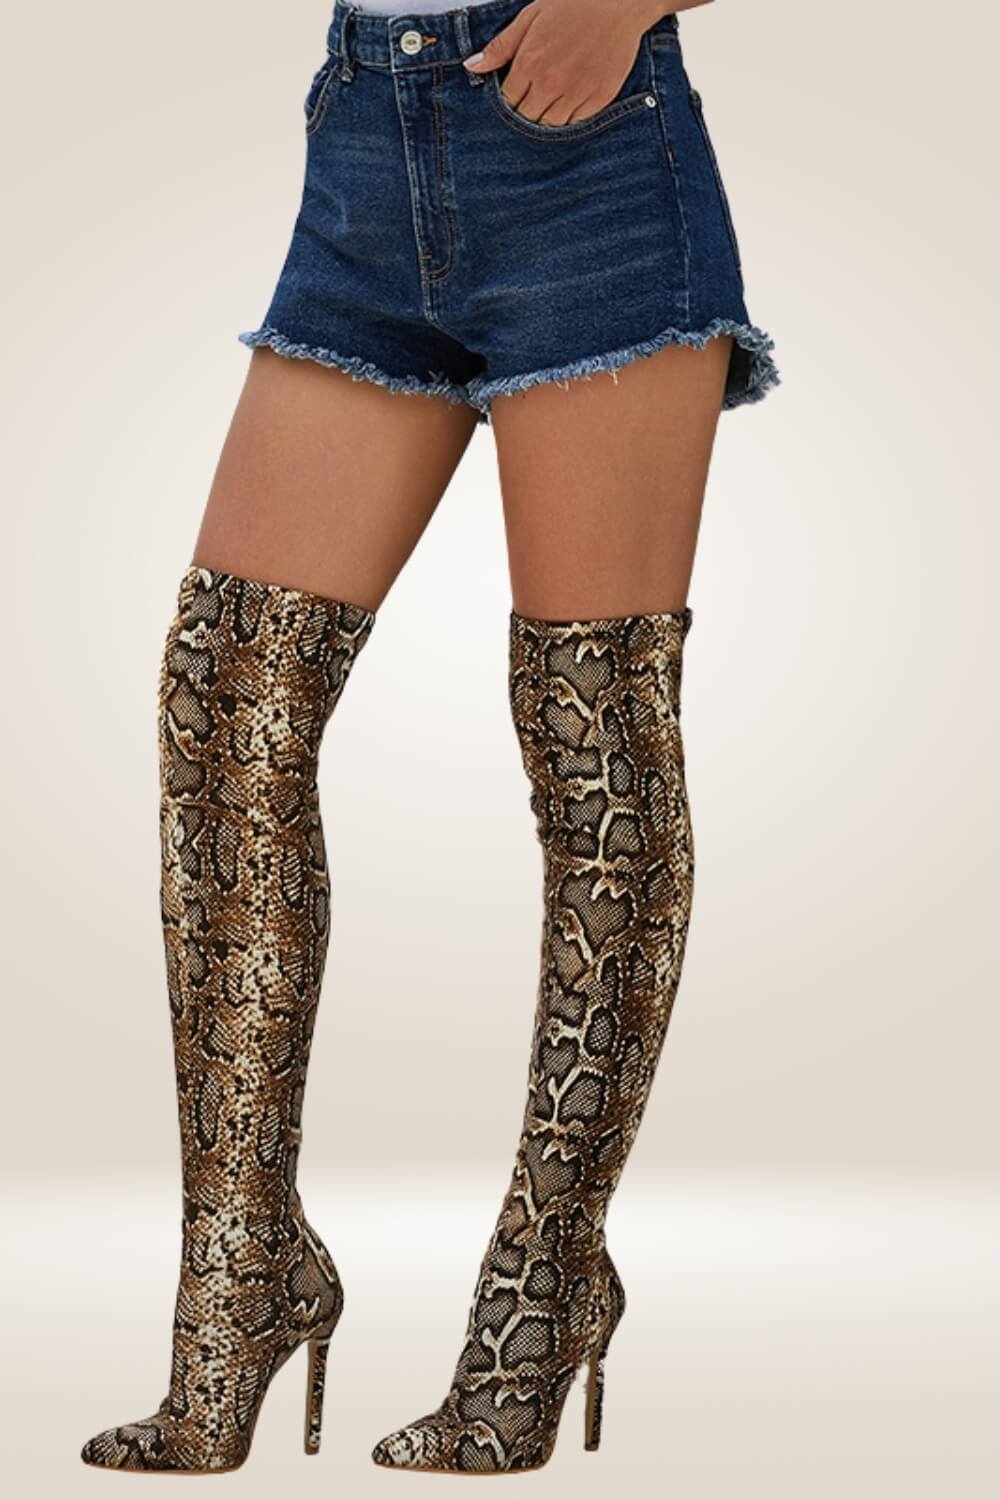 Leopard Over The Knee High Heel Boots - TGC Boutique - Boots